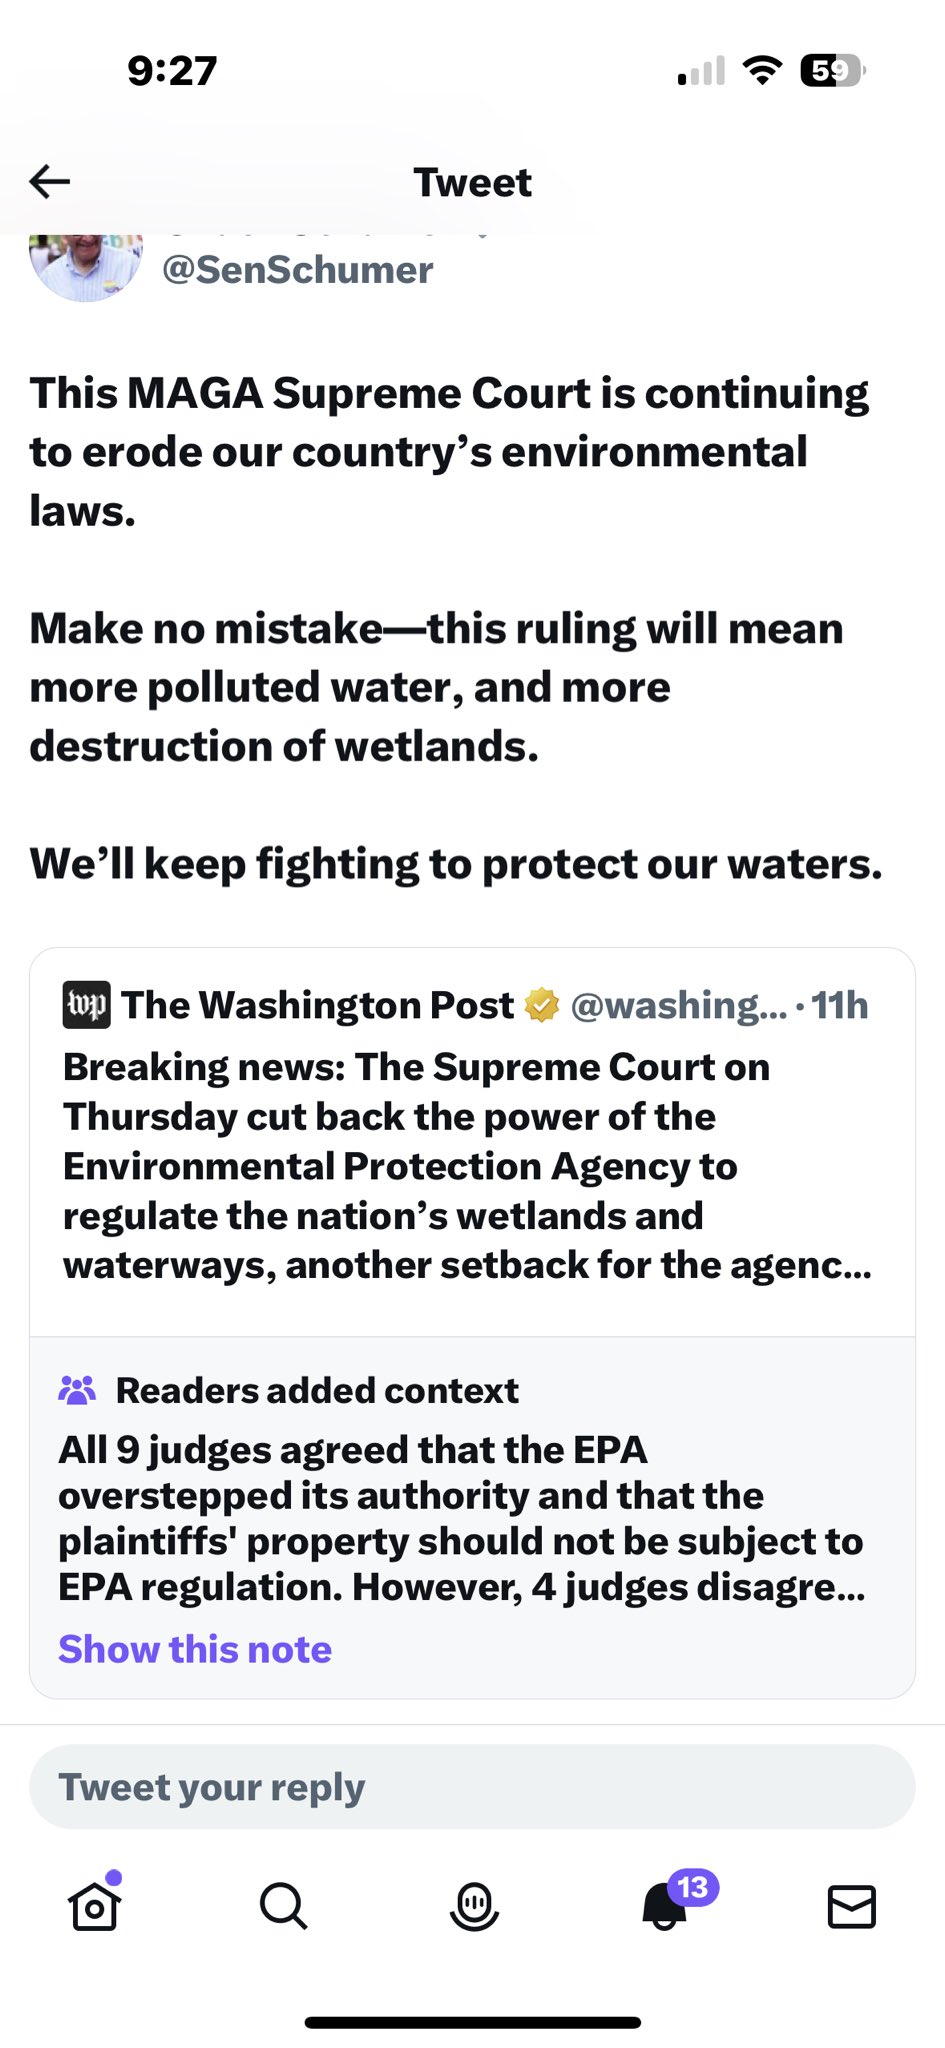 funny community notes - document - K Tweet This Maga Supreme Court is continuing to erode our country's environmental laws. Make no mistakethis ruling will mean more polluted water, and more destruction of wetlands. 59 We'll keep fighting to protect our w